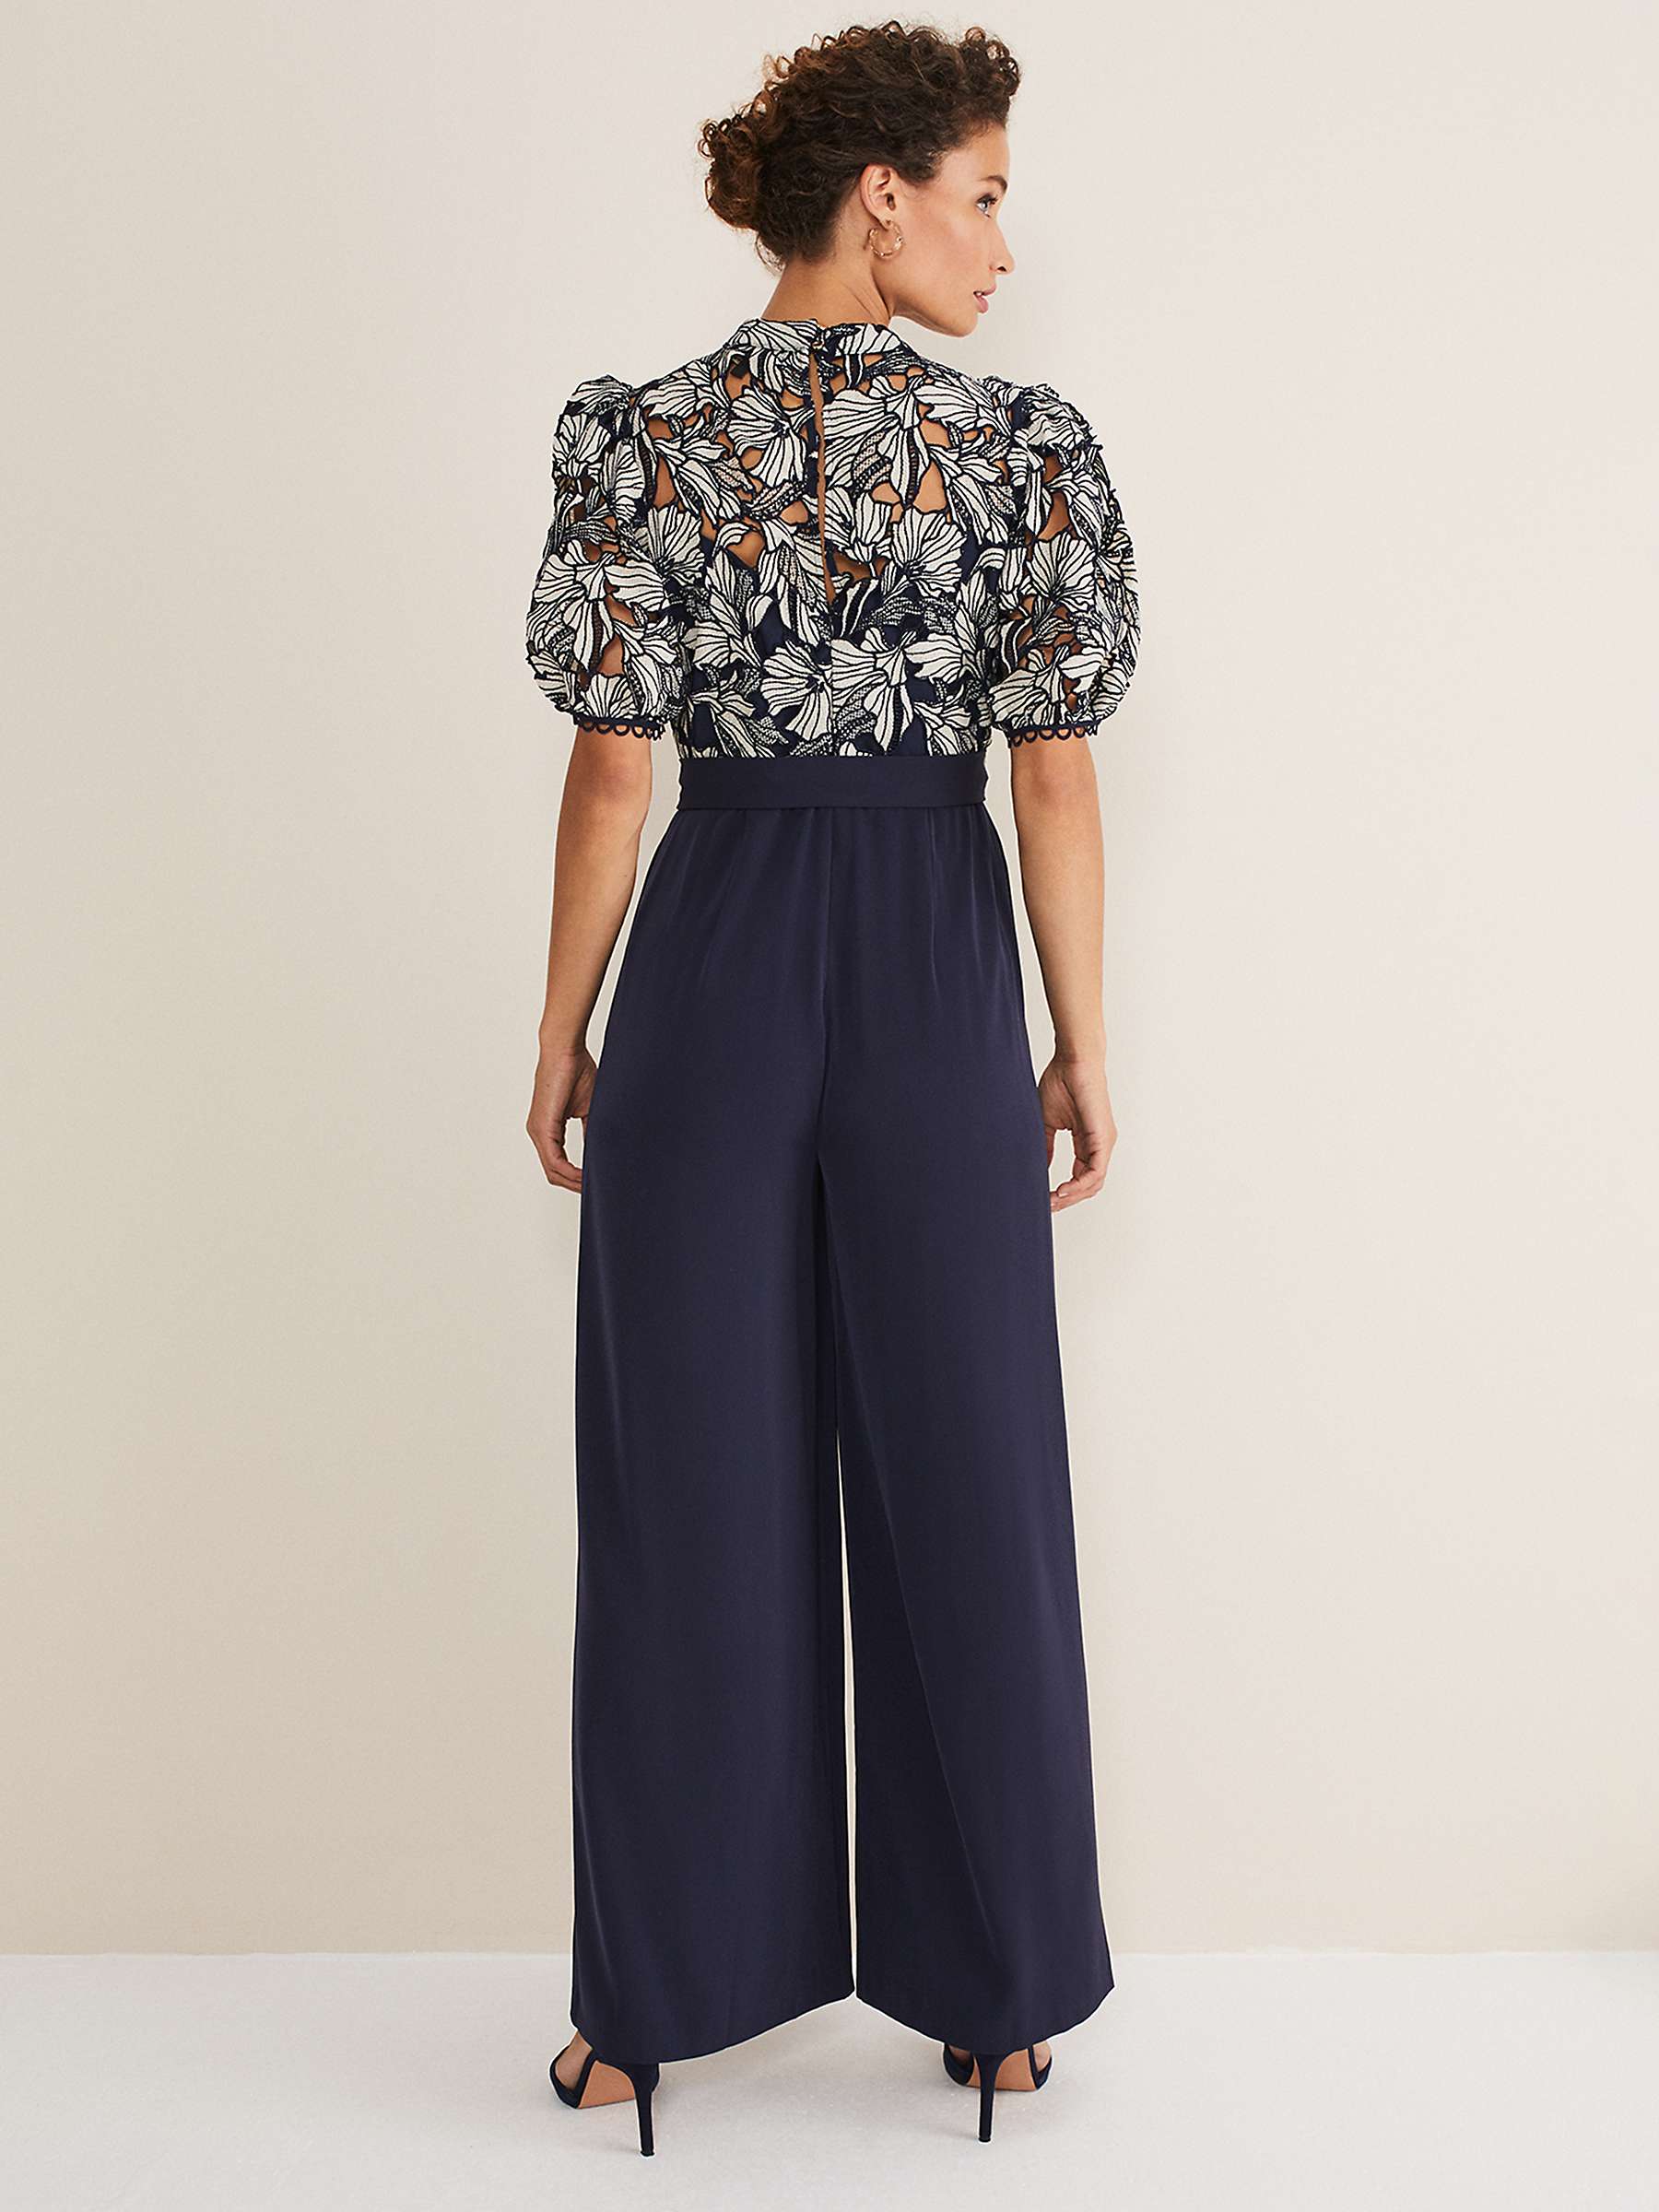 Buy Phase Eight Caitlin Lace Bodice Wide Leg Jumpsuit, Navy/Ivory Online at johnlewis.com